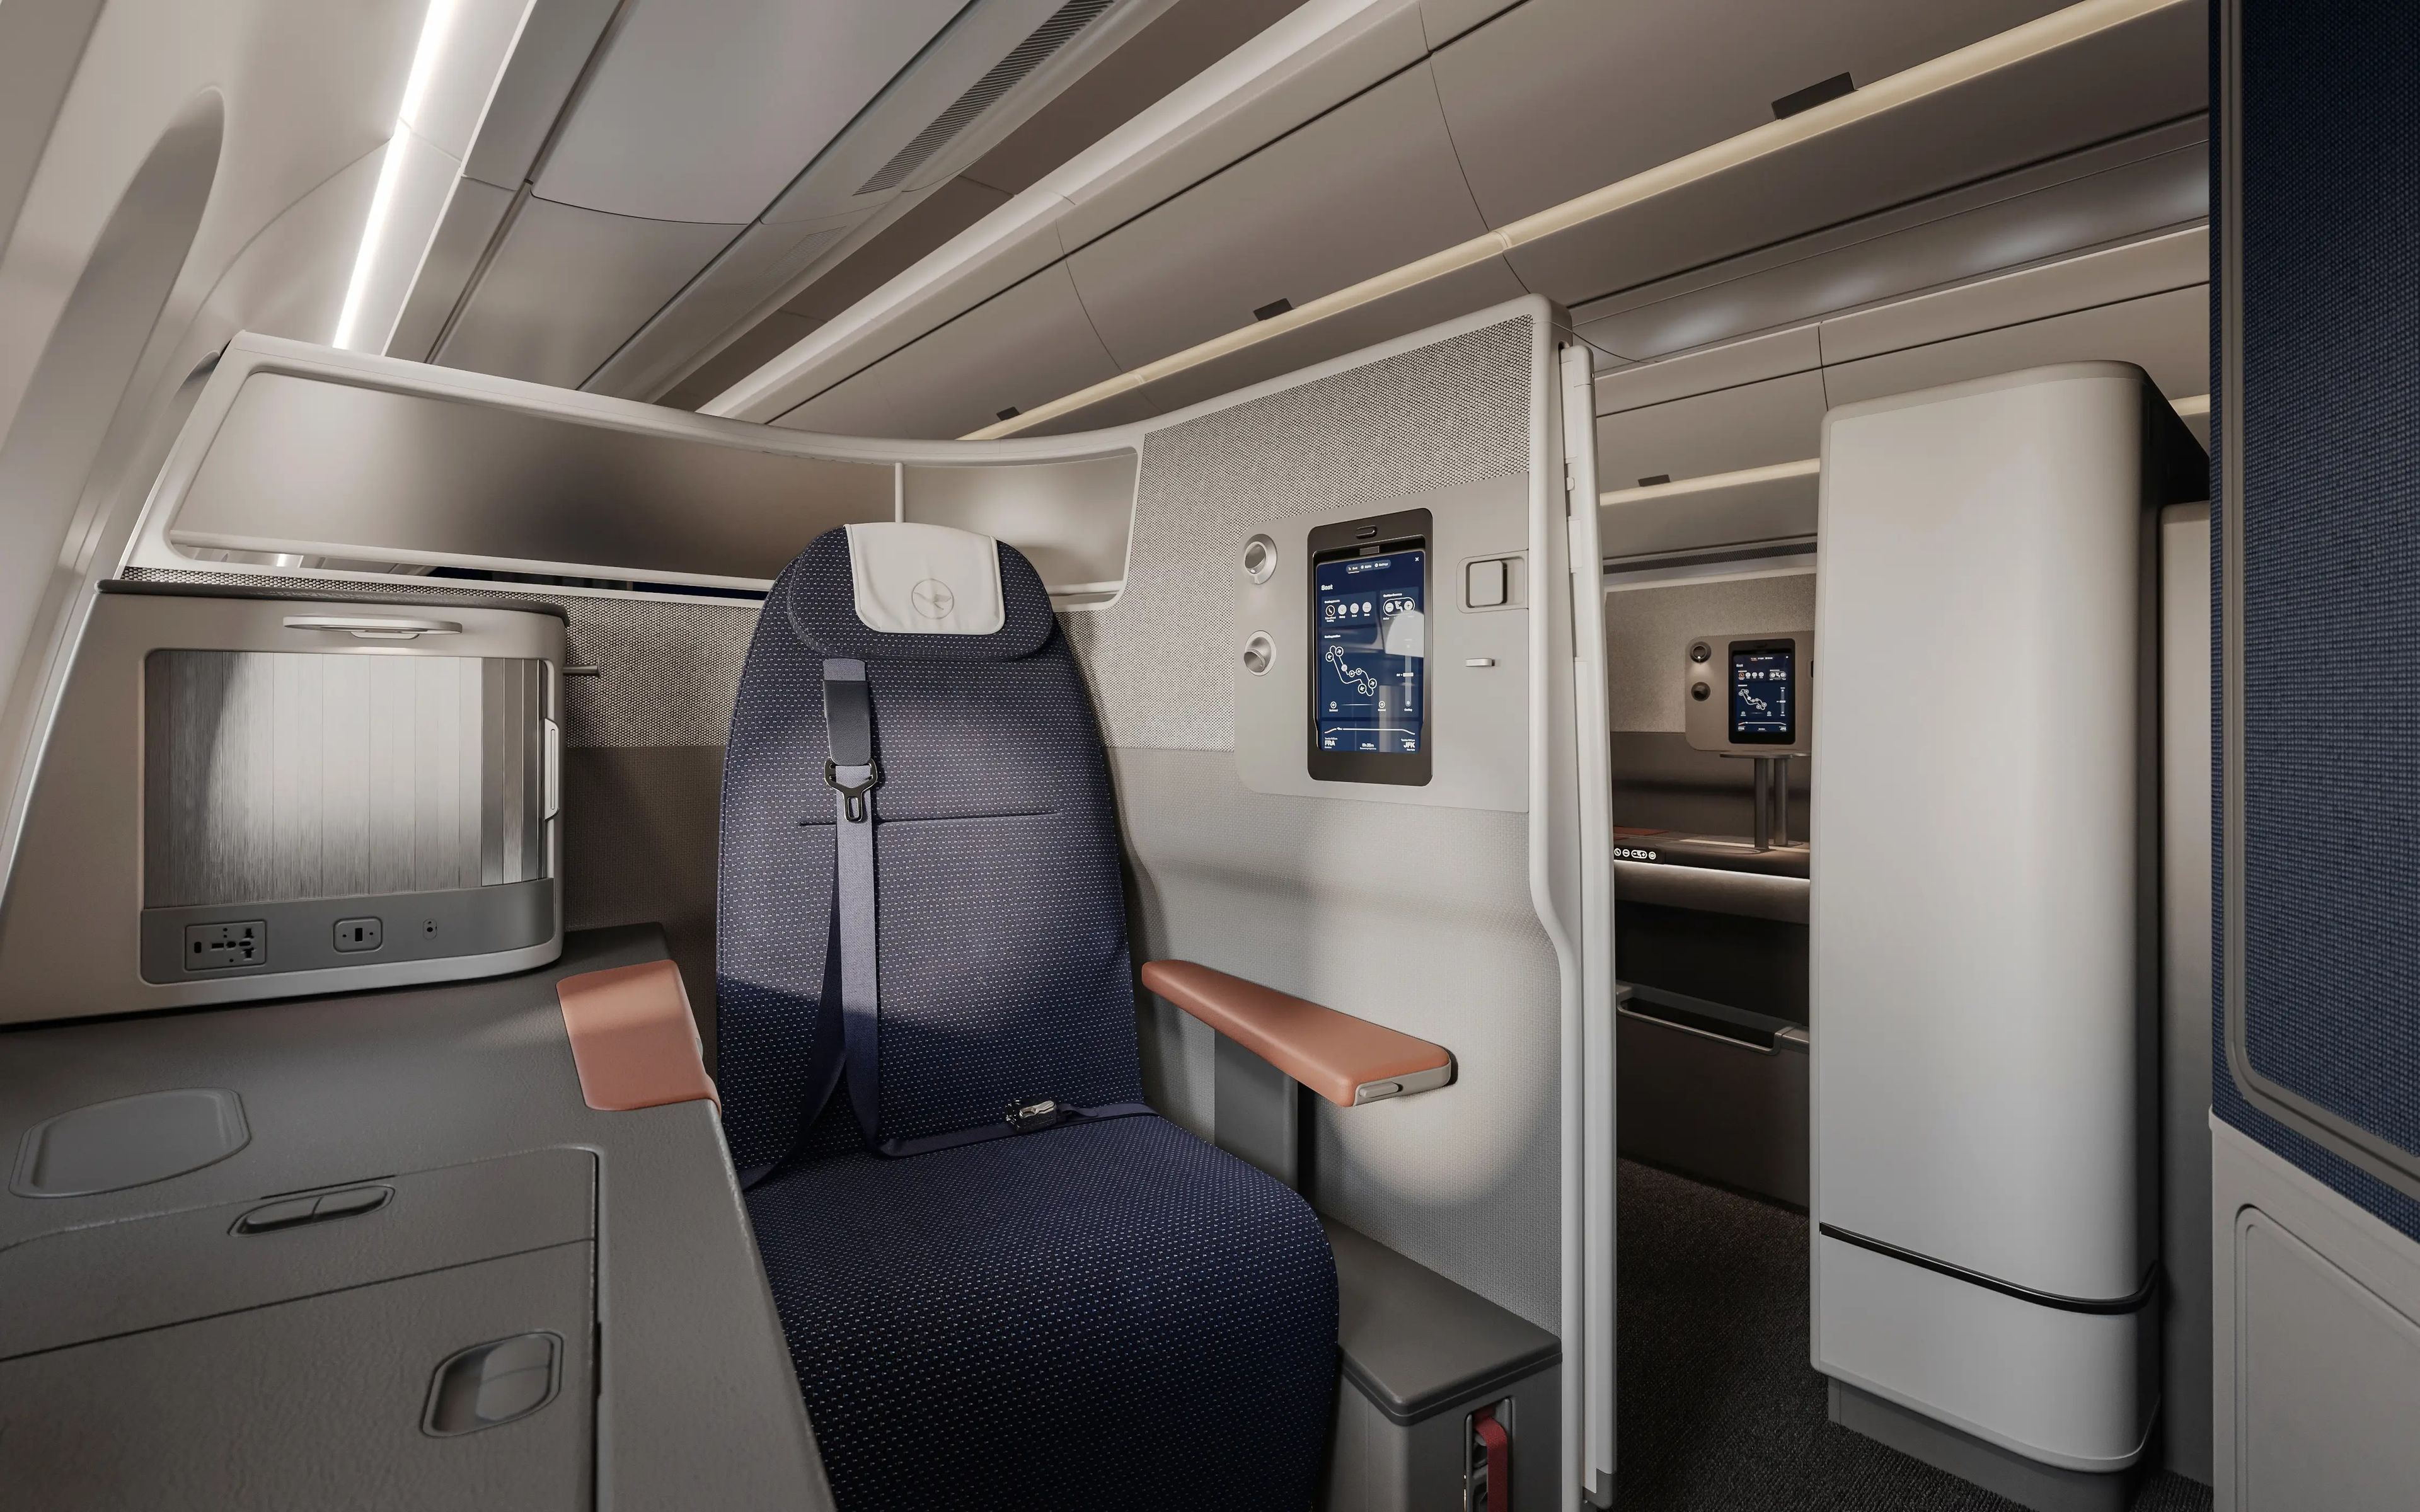 A single suite in Lufthansa's new business-class cabin.